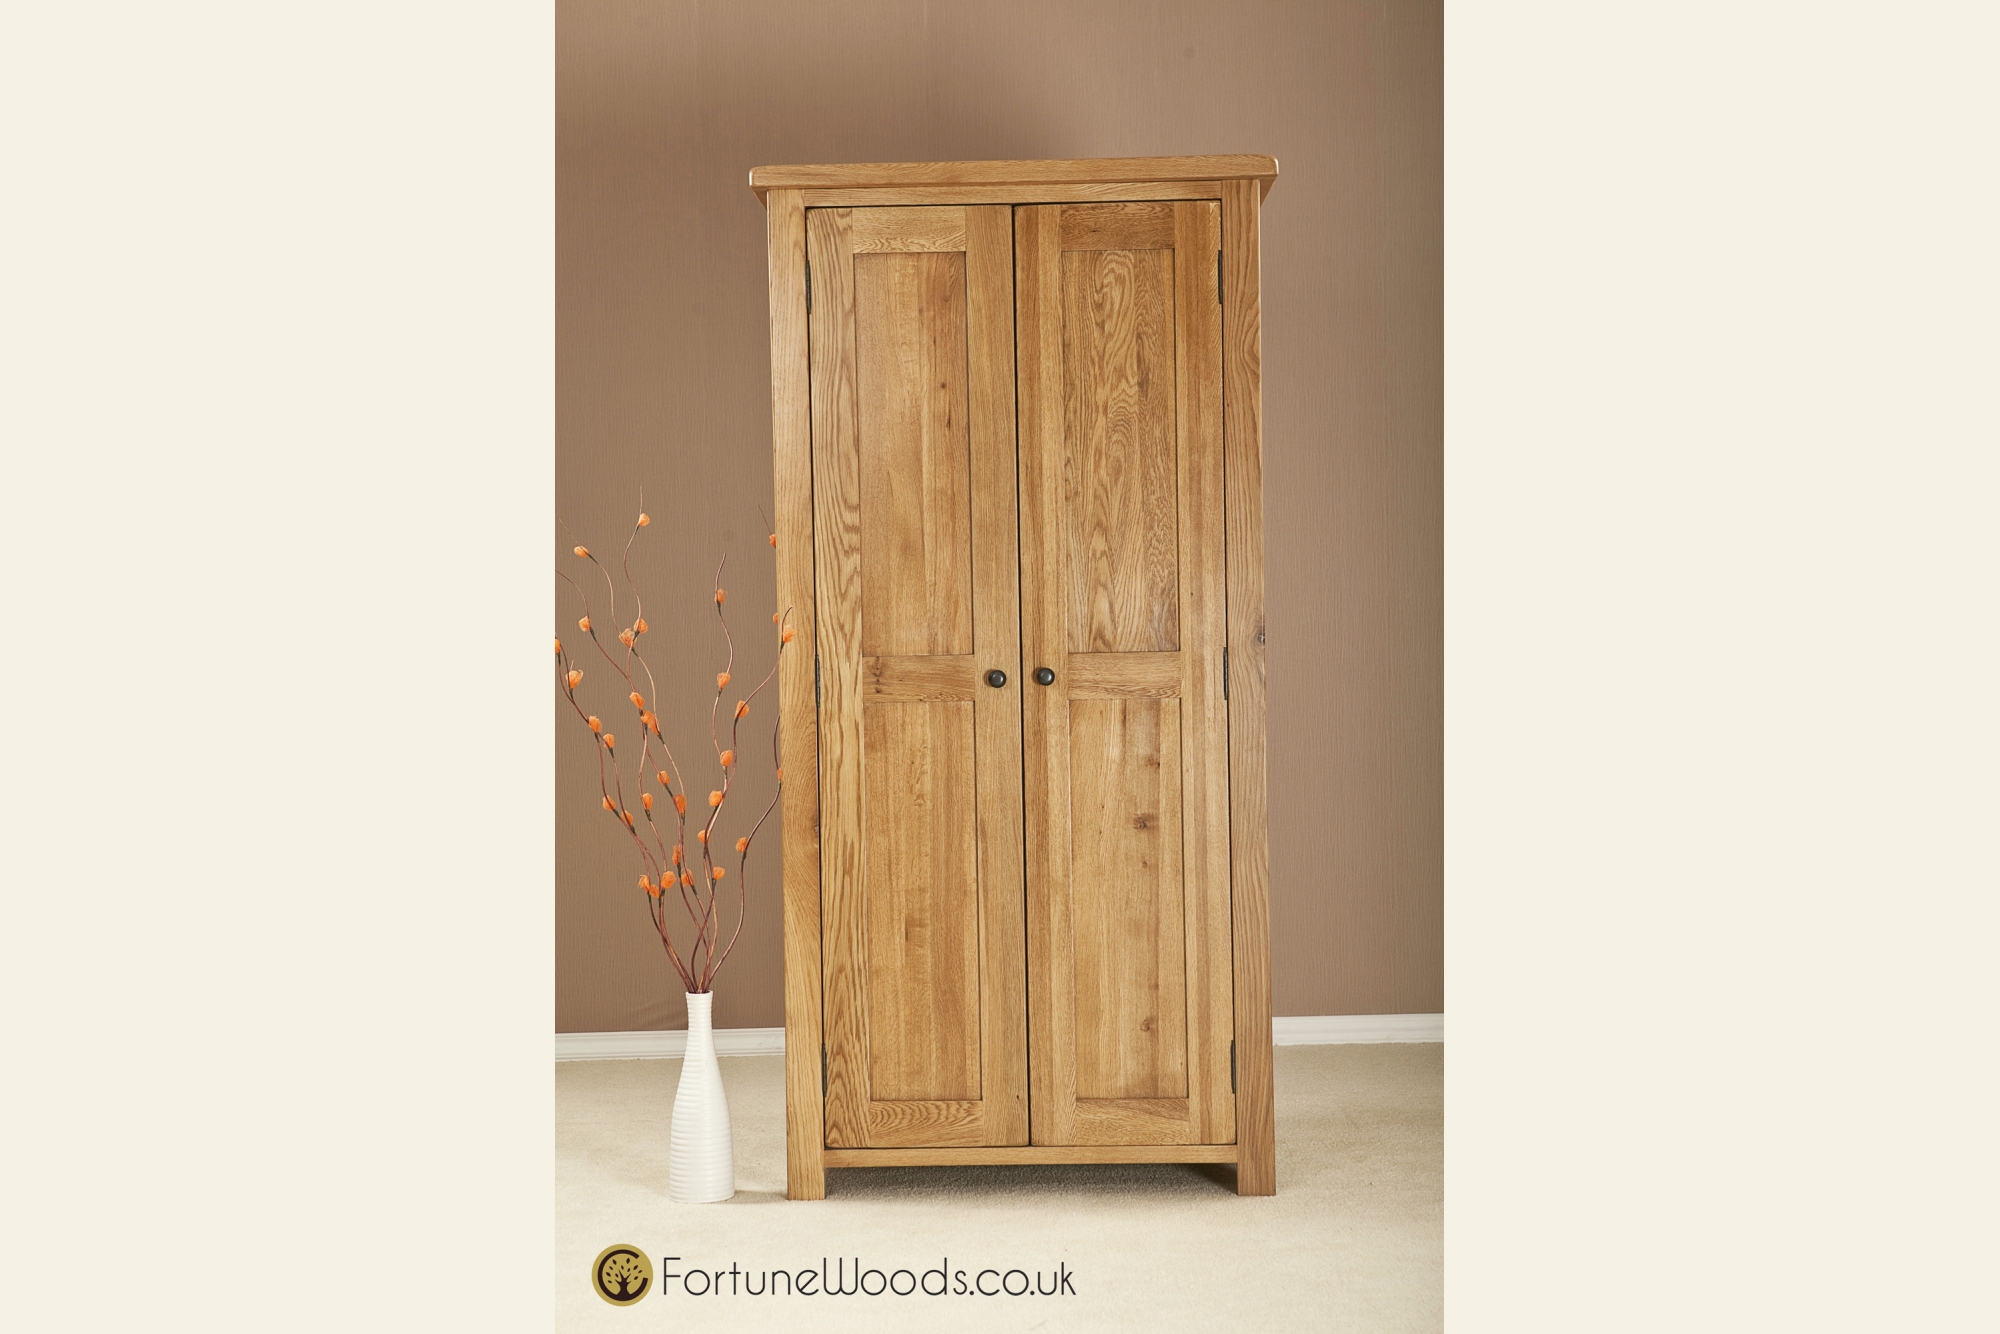 Fortune Woods Cotswold Full Length Wardrobe